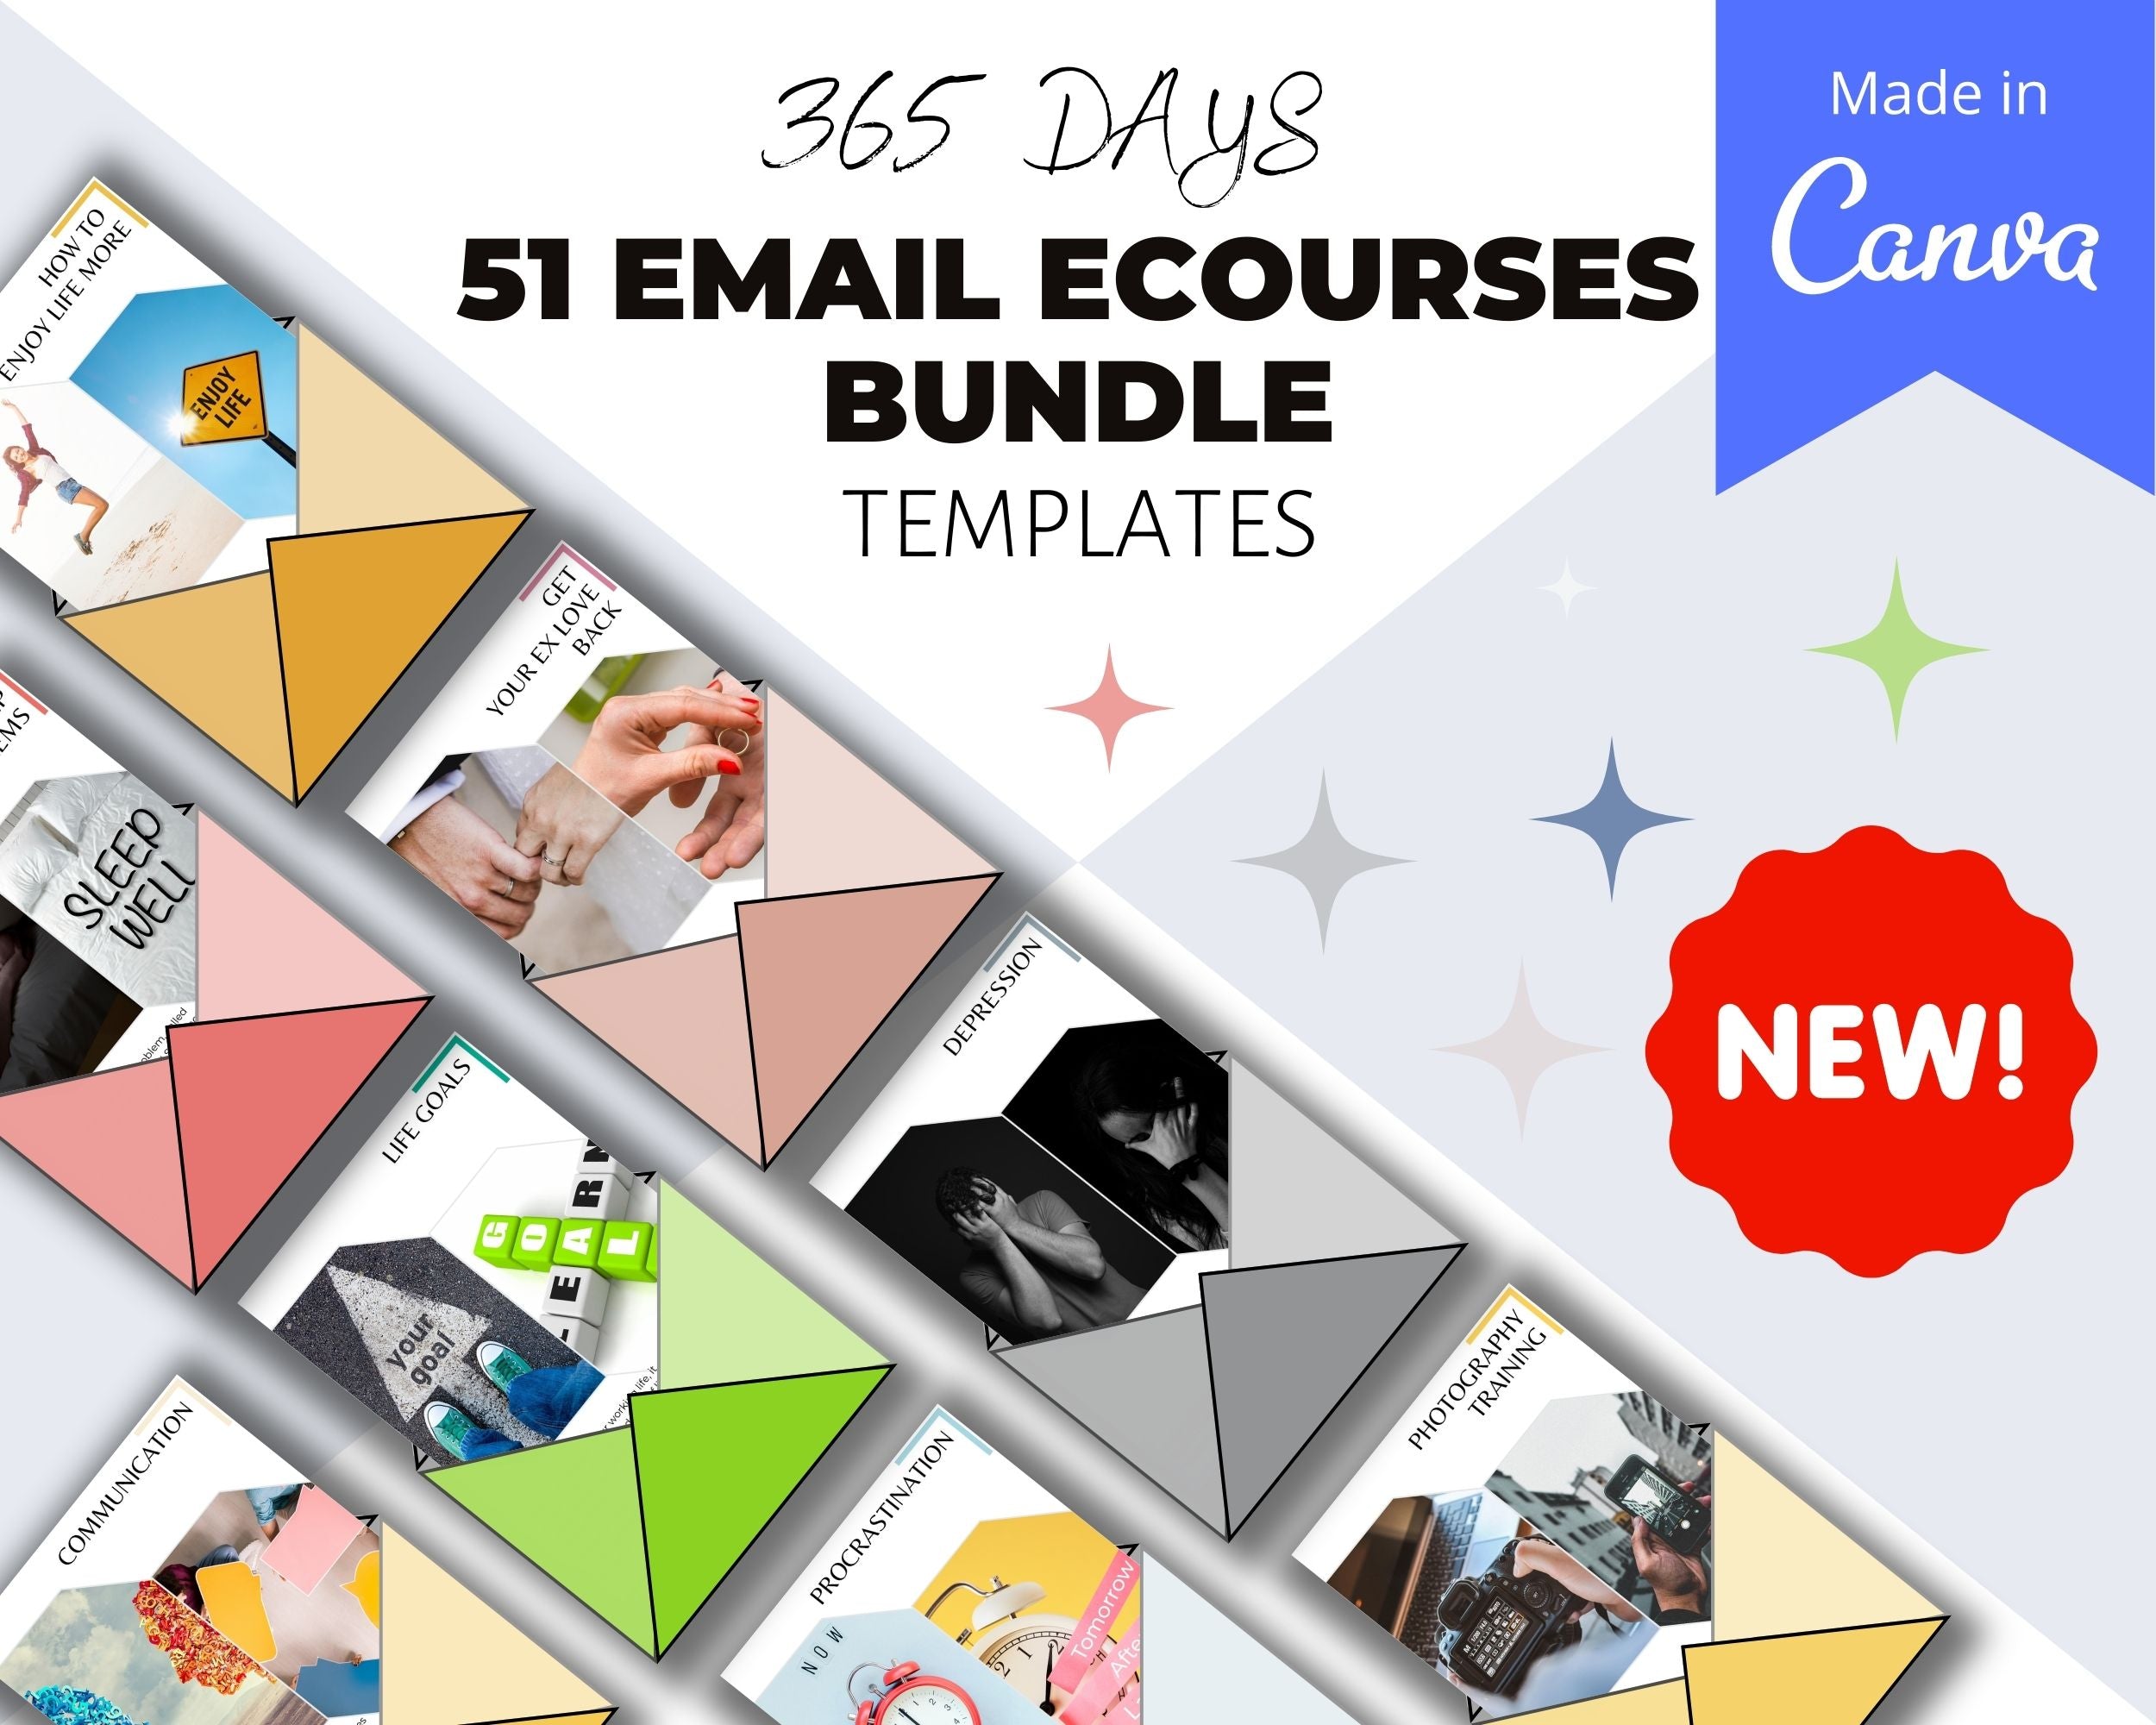 Bundle of 51 Email eCourses Templates | 350+ Days Done-for-You eCourses | Rebrandable and Resizable Canva Template